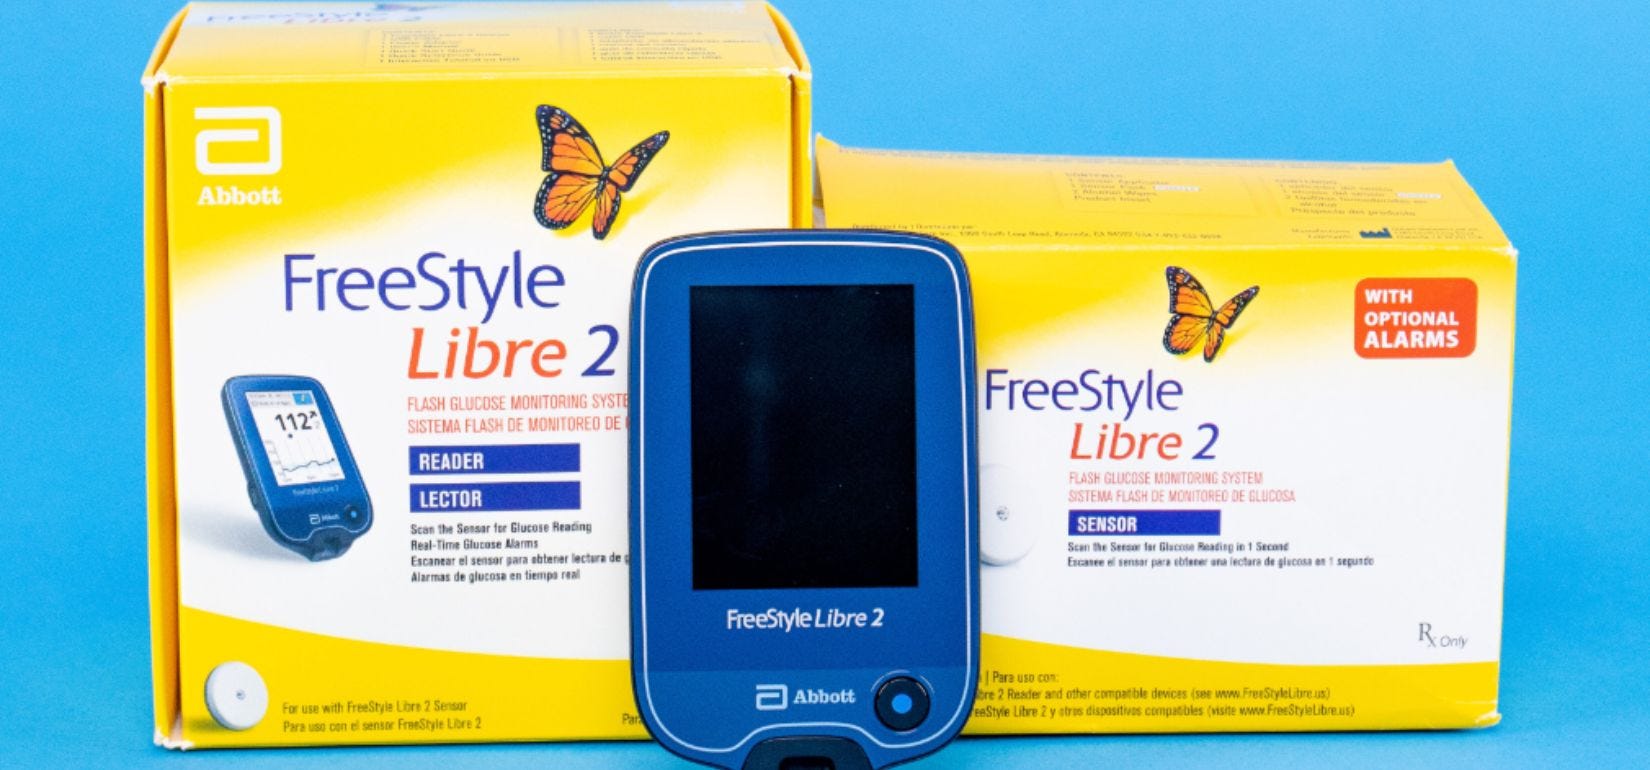 How To Print Logbook From Freestyle Libre